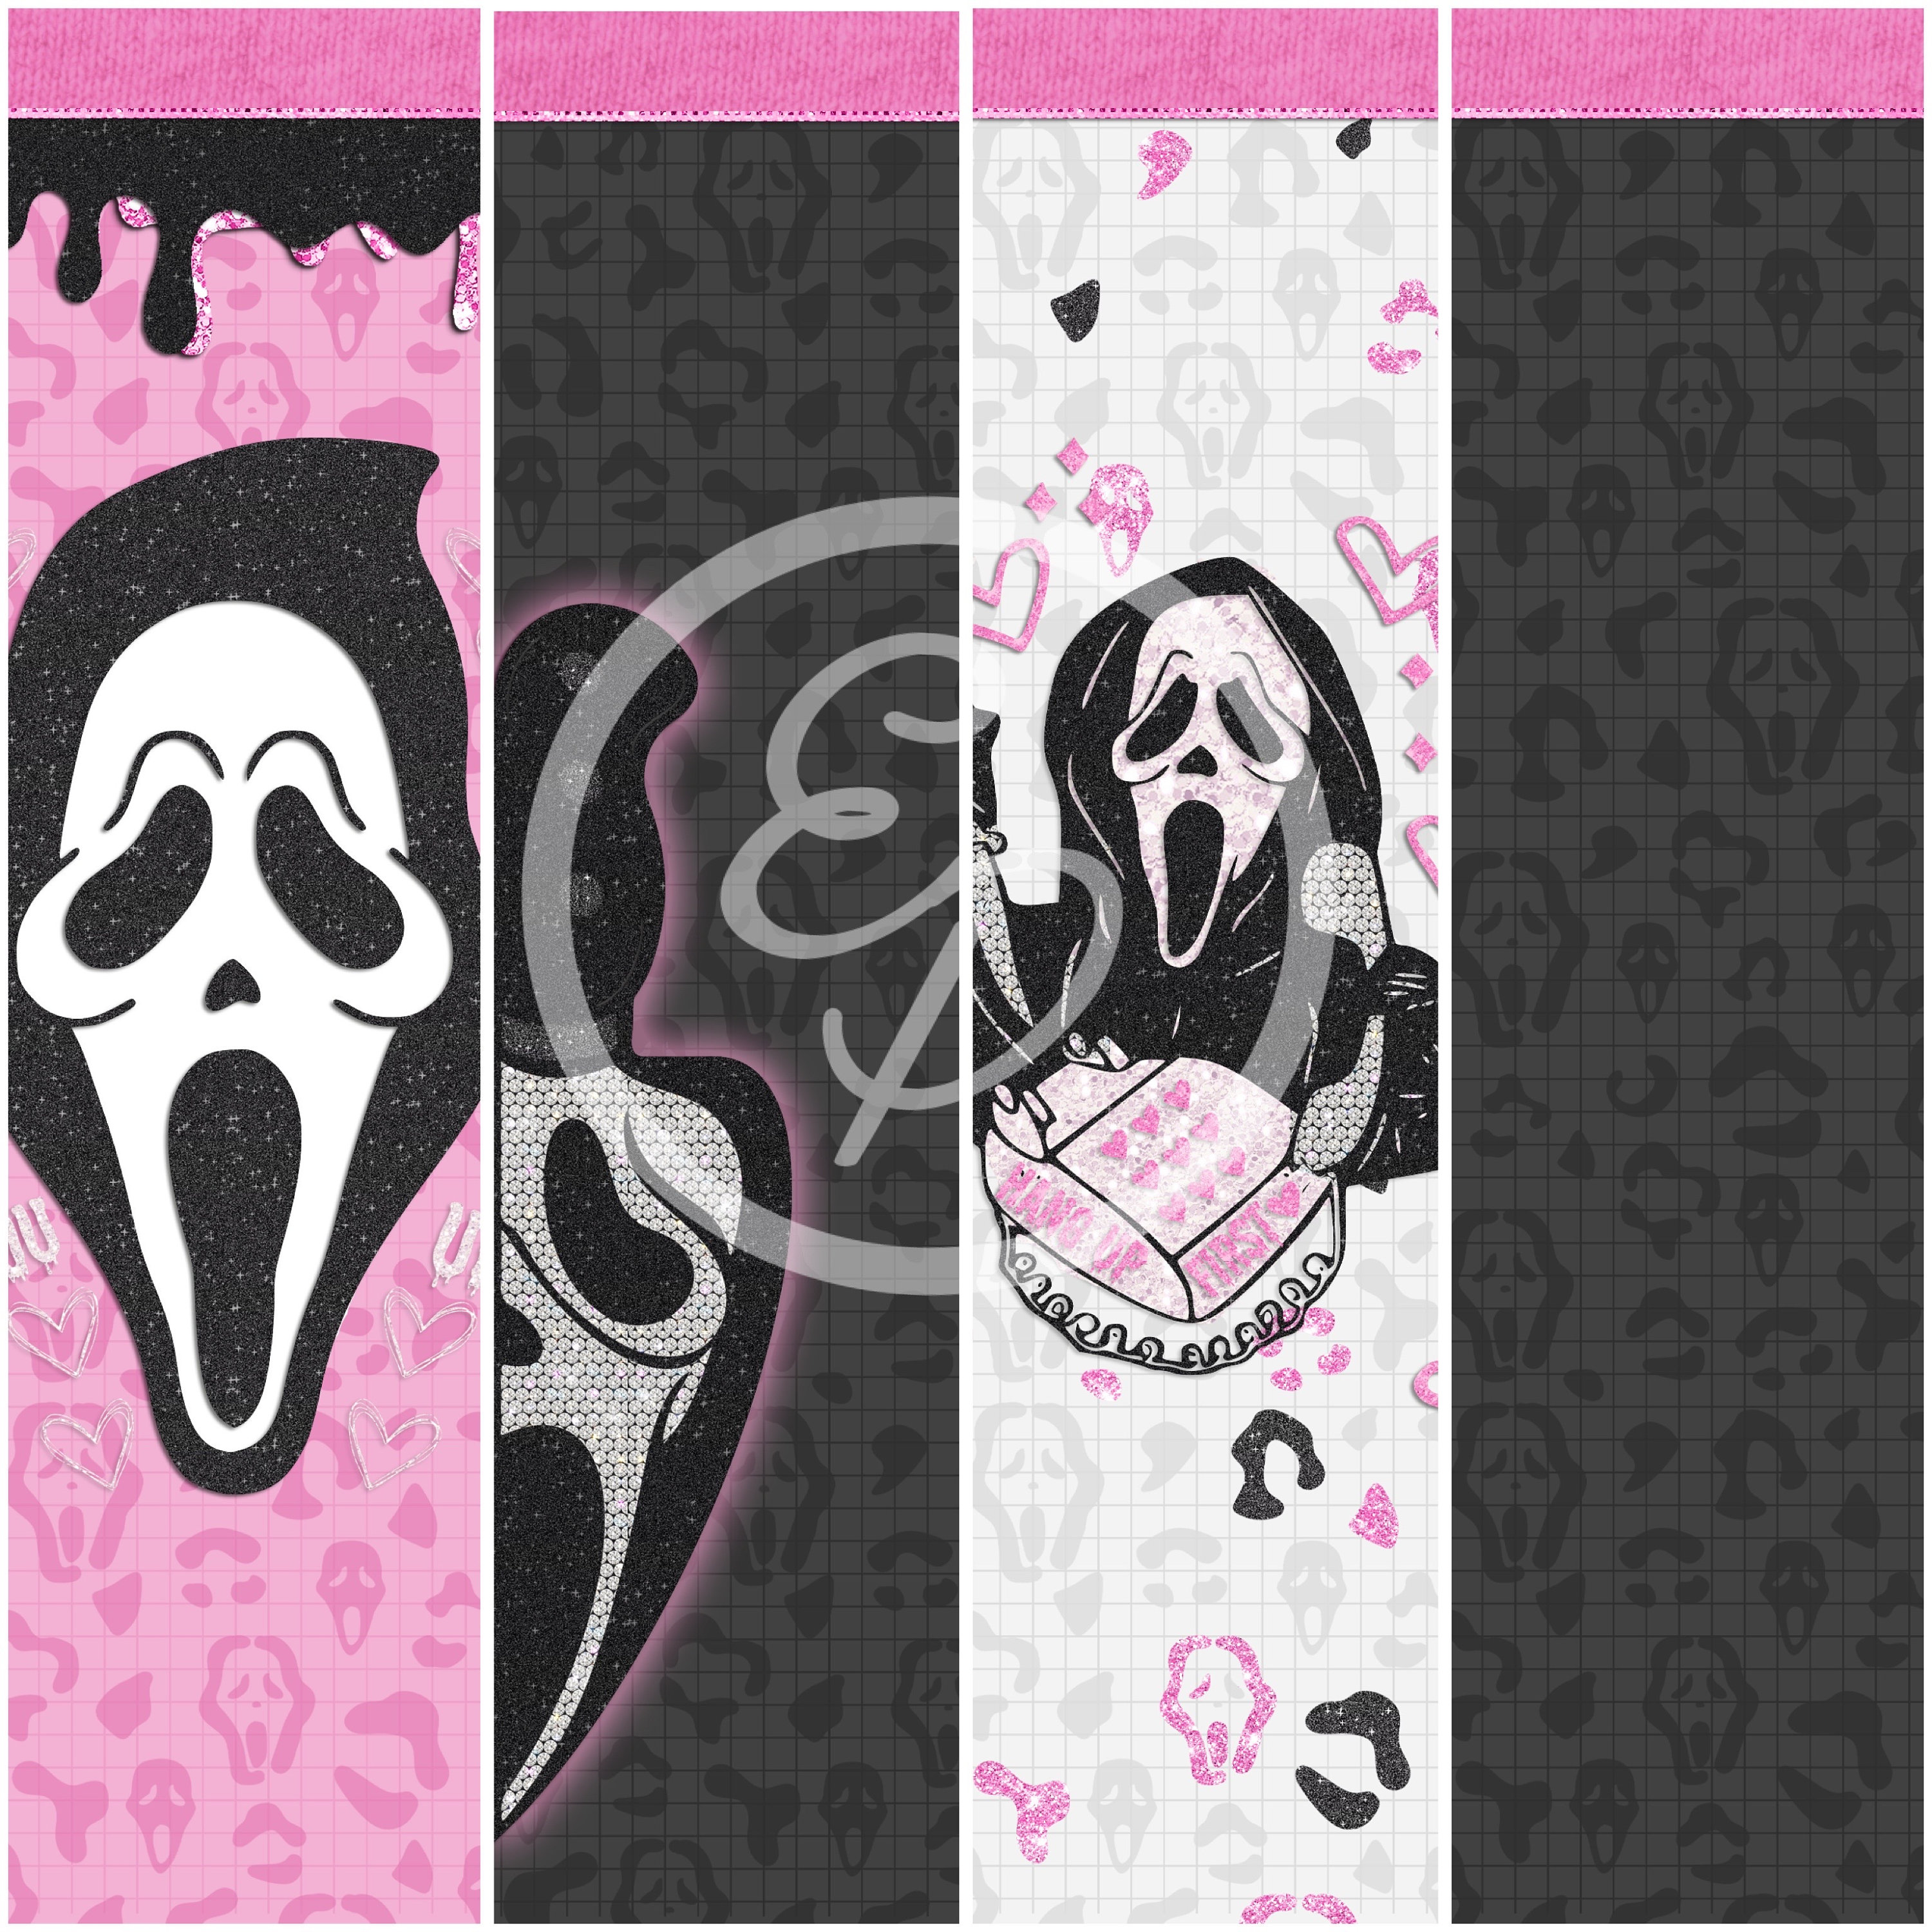 Scream wallpaper for Phone Enjoy  Scary wallpaper Halloween wallpaper  backgrounds Halloween wallpaper iphone